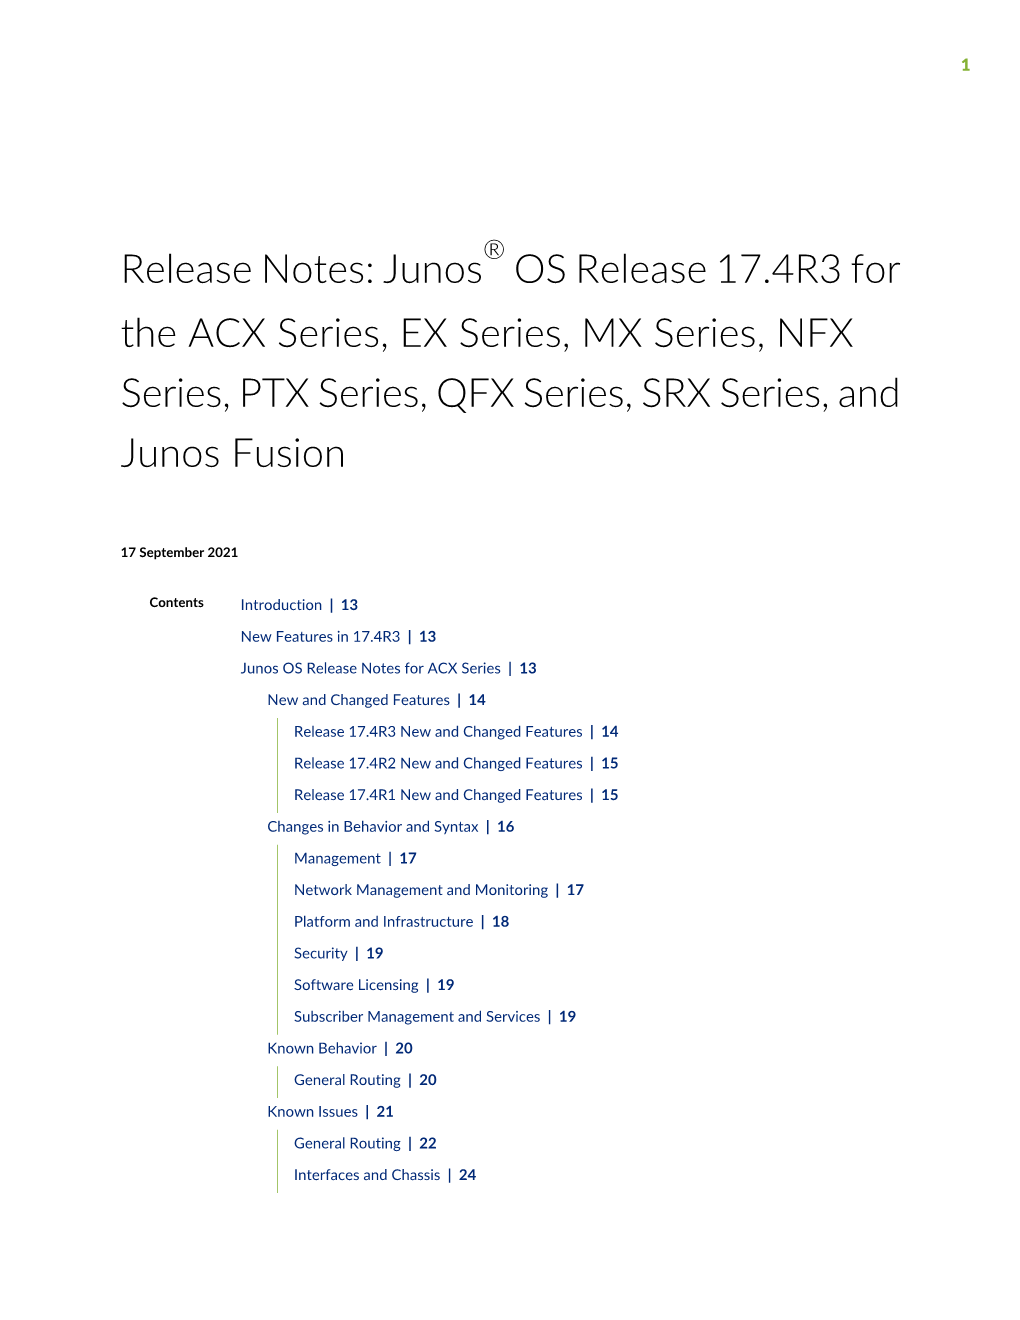 Release Notes: Junos® OS Release 17.4R3 for the ACX Series, EX Series, MX Series, NFX Series, PTX Series, QFX Series, SRX Series, and Junos Fusion